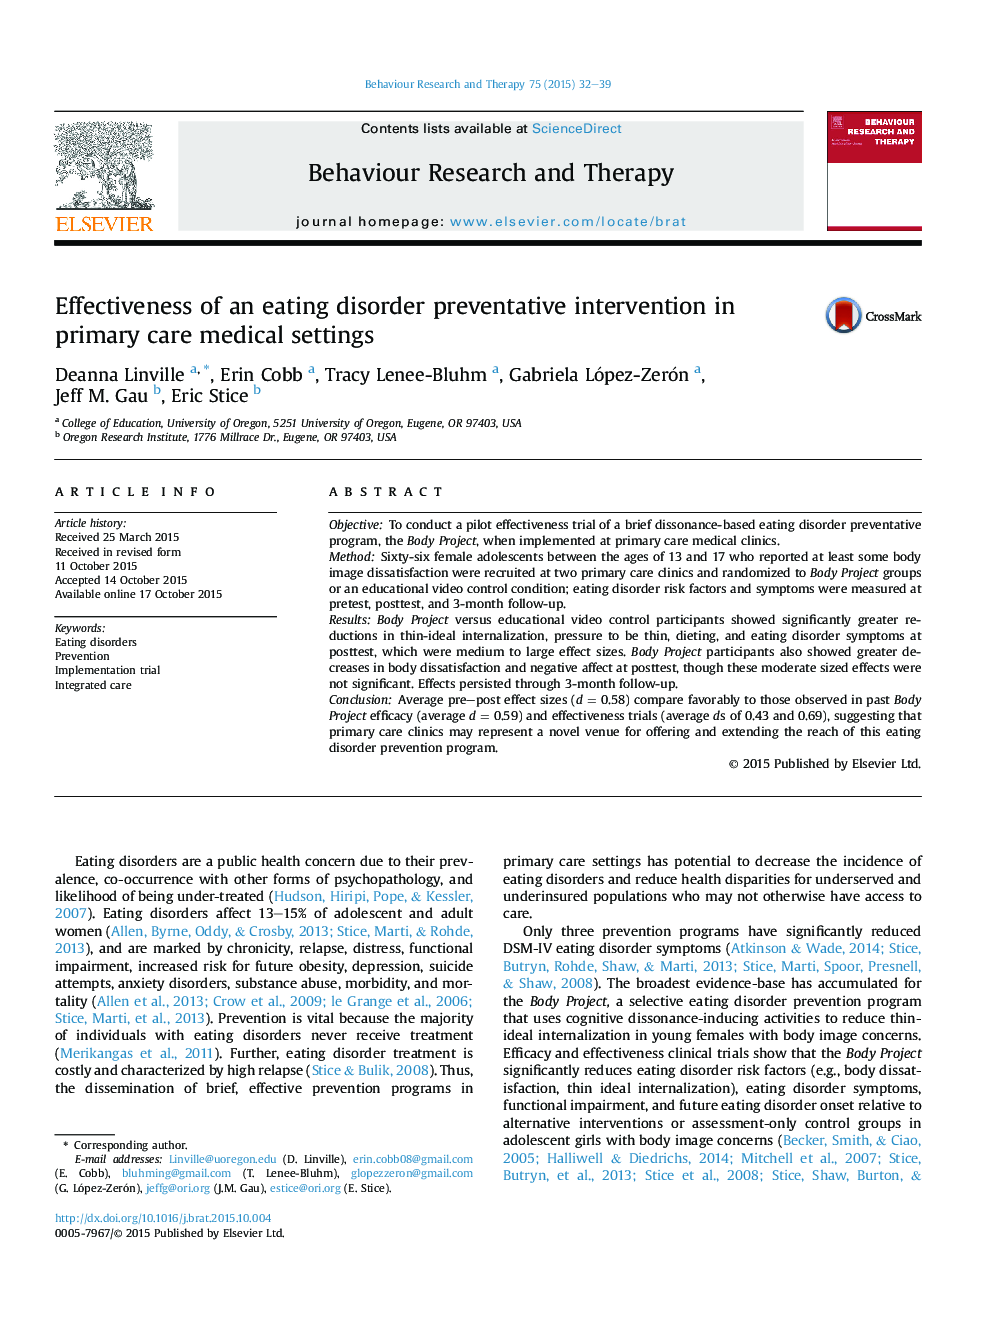 Effectiveness of an eating disorder preventative intervention in primary care medical settings